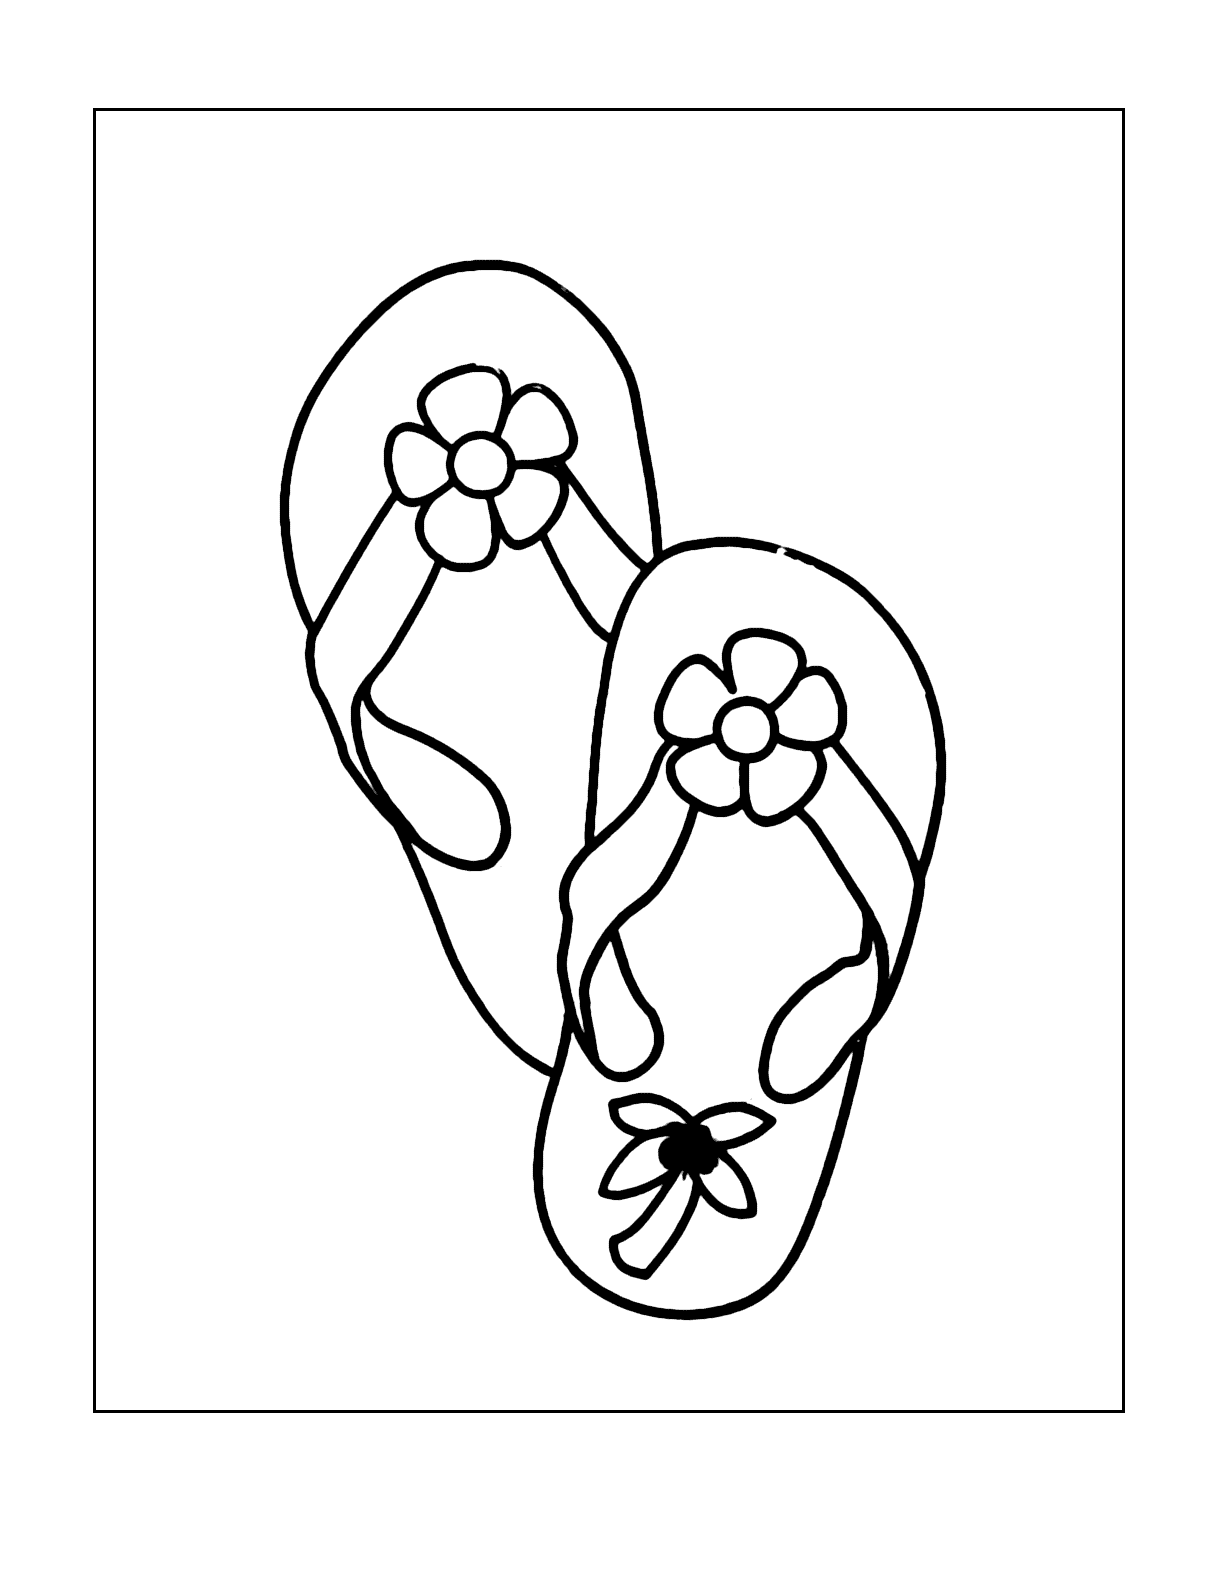 Flip Flops With Daisy Flowers Coloring Page